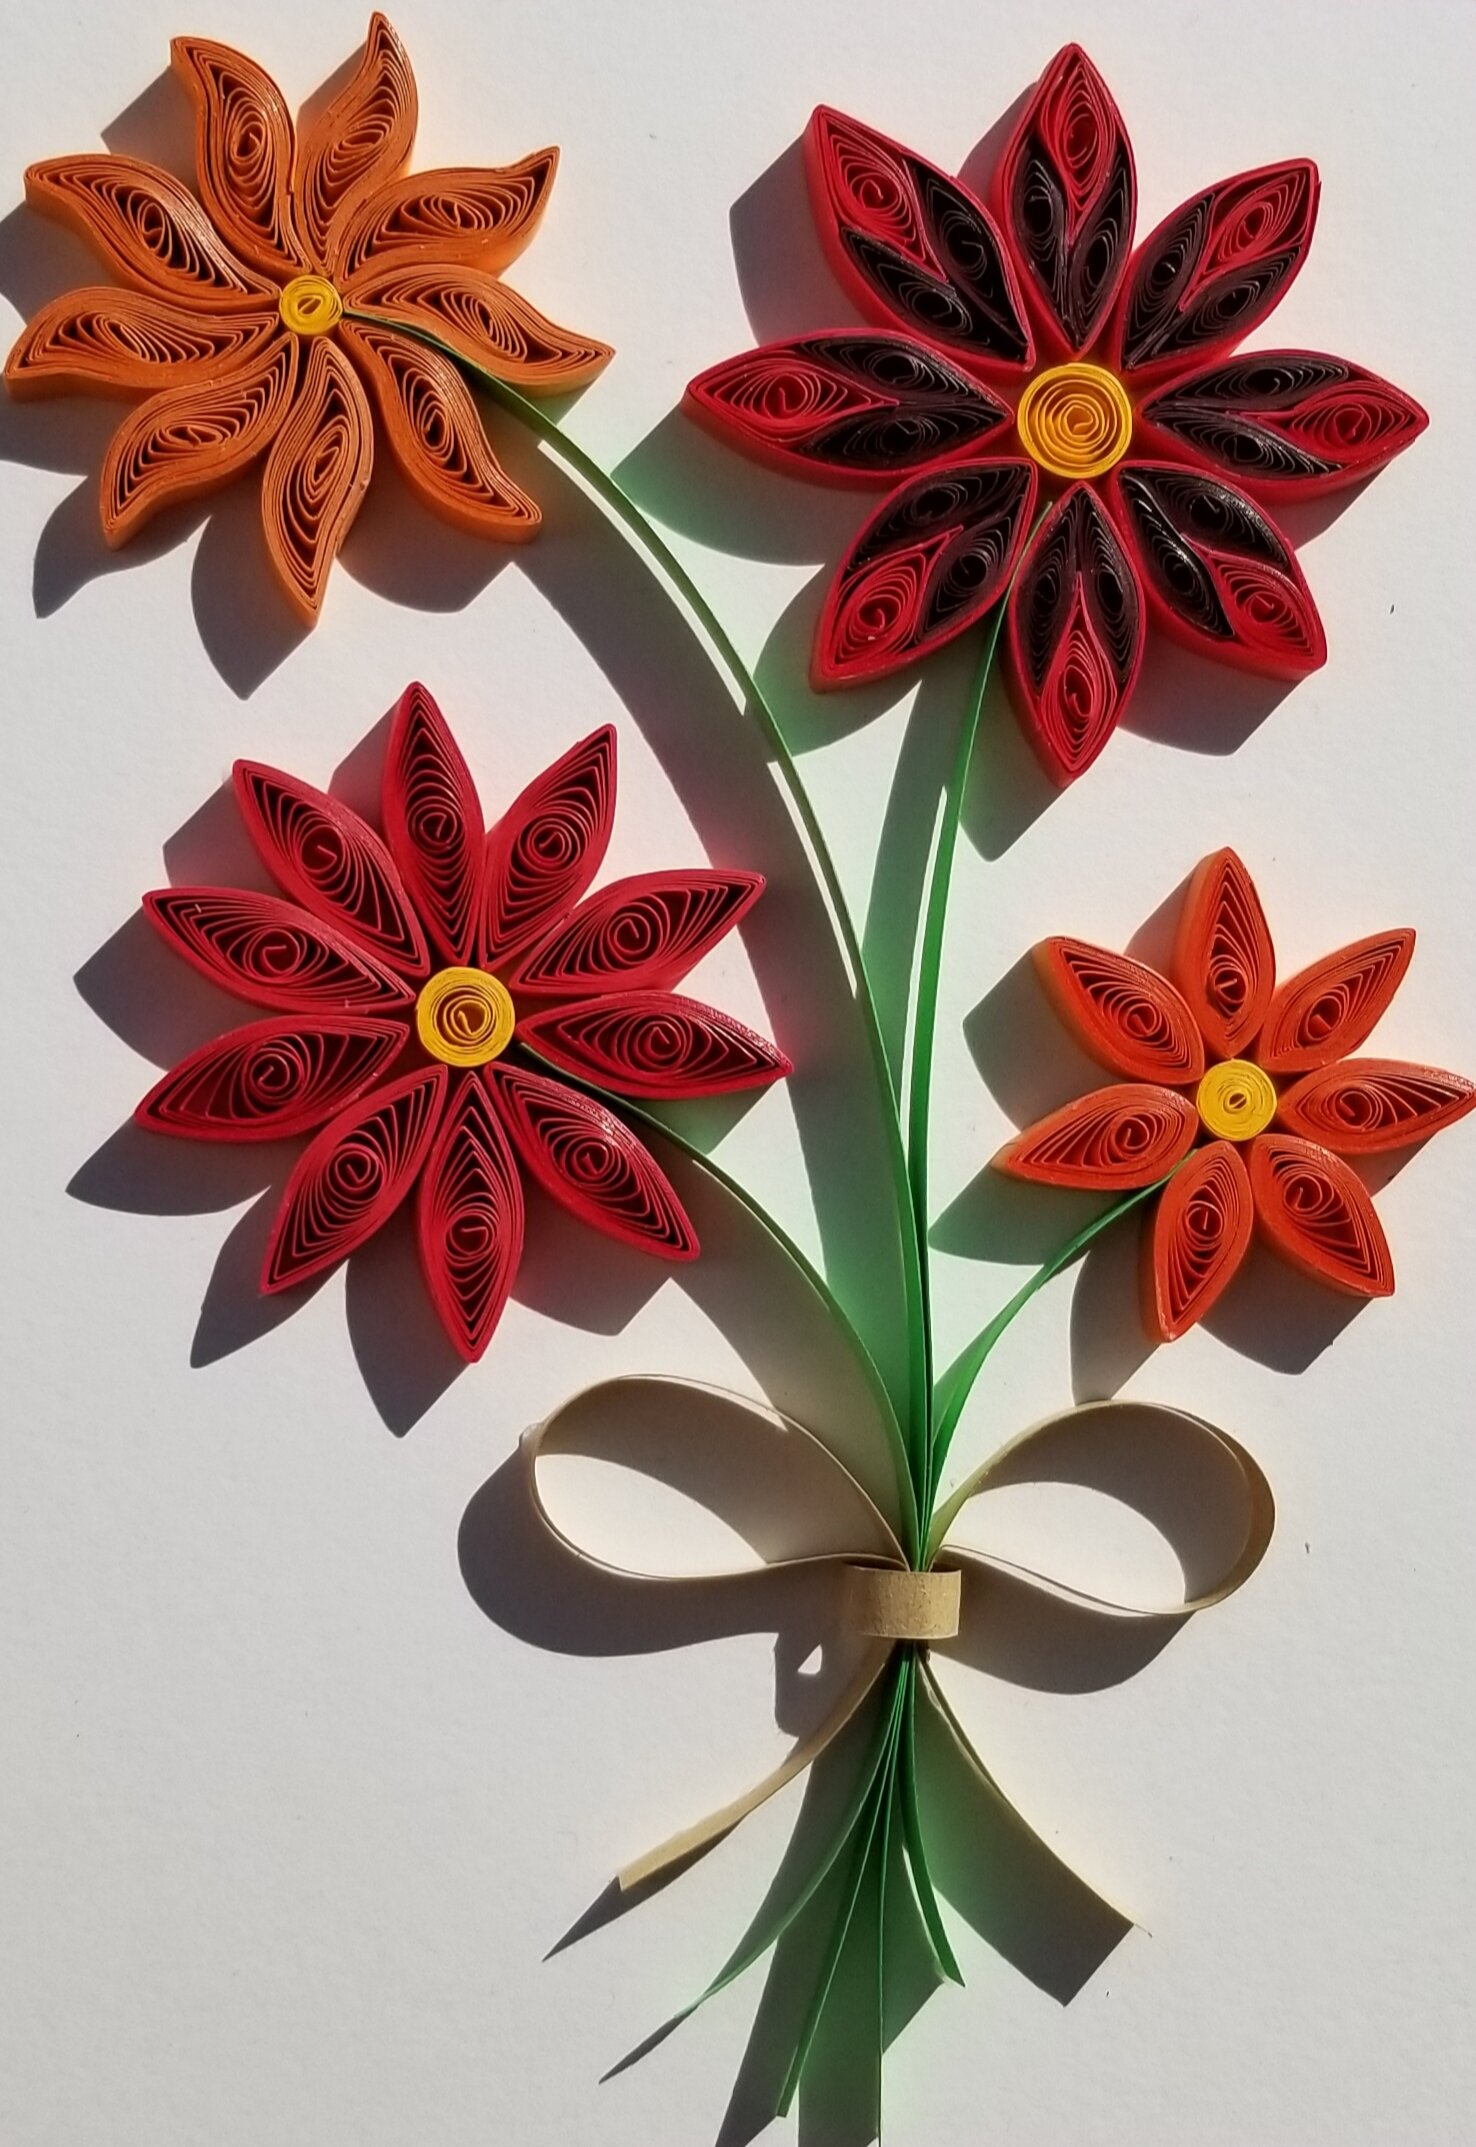 Introduction to Quilling — The Chattery